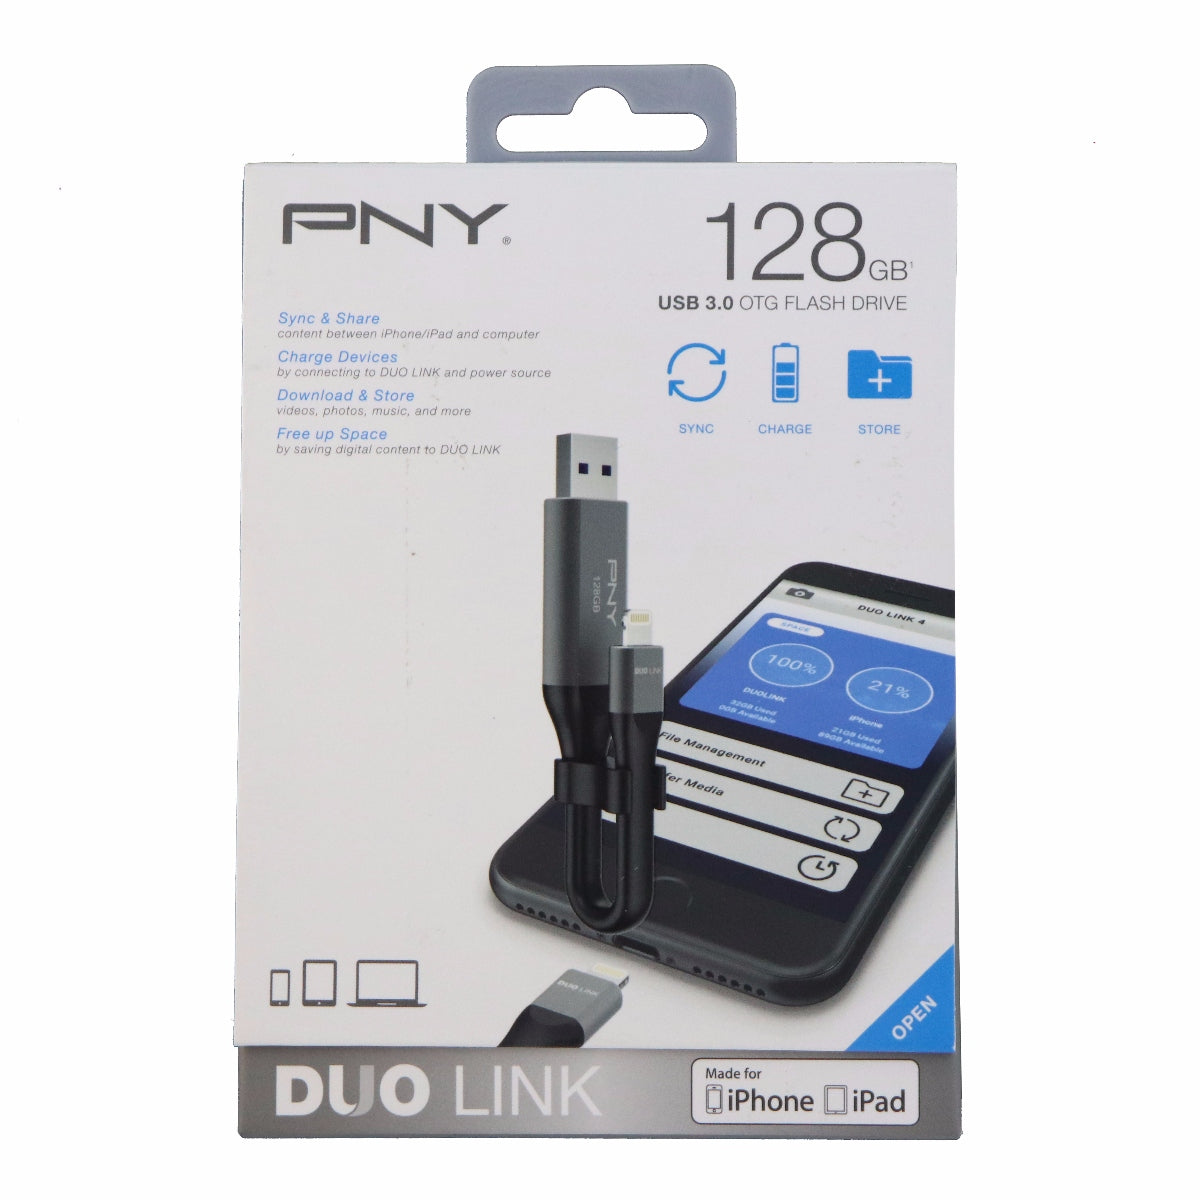 PNY 128GB Duo Link USB 3.0 On the Go Flash Drive for iPhone and iPads